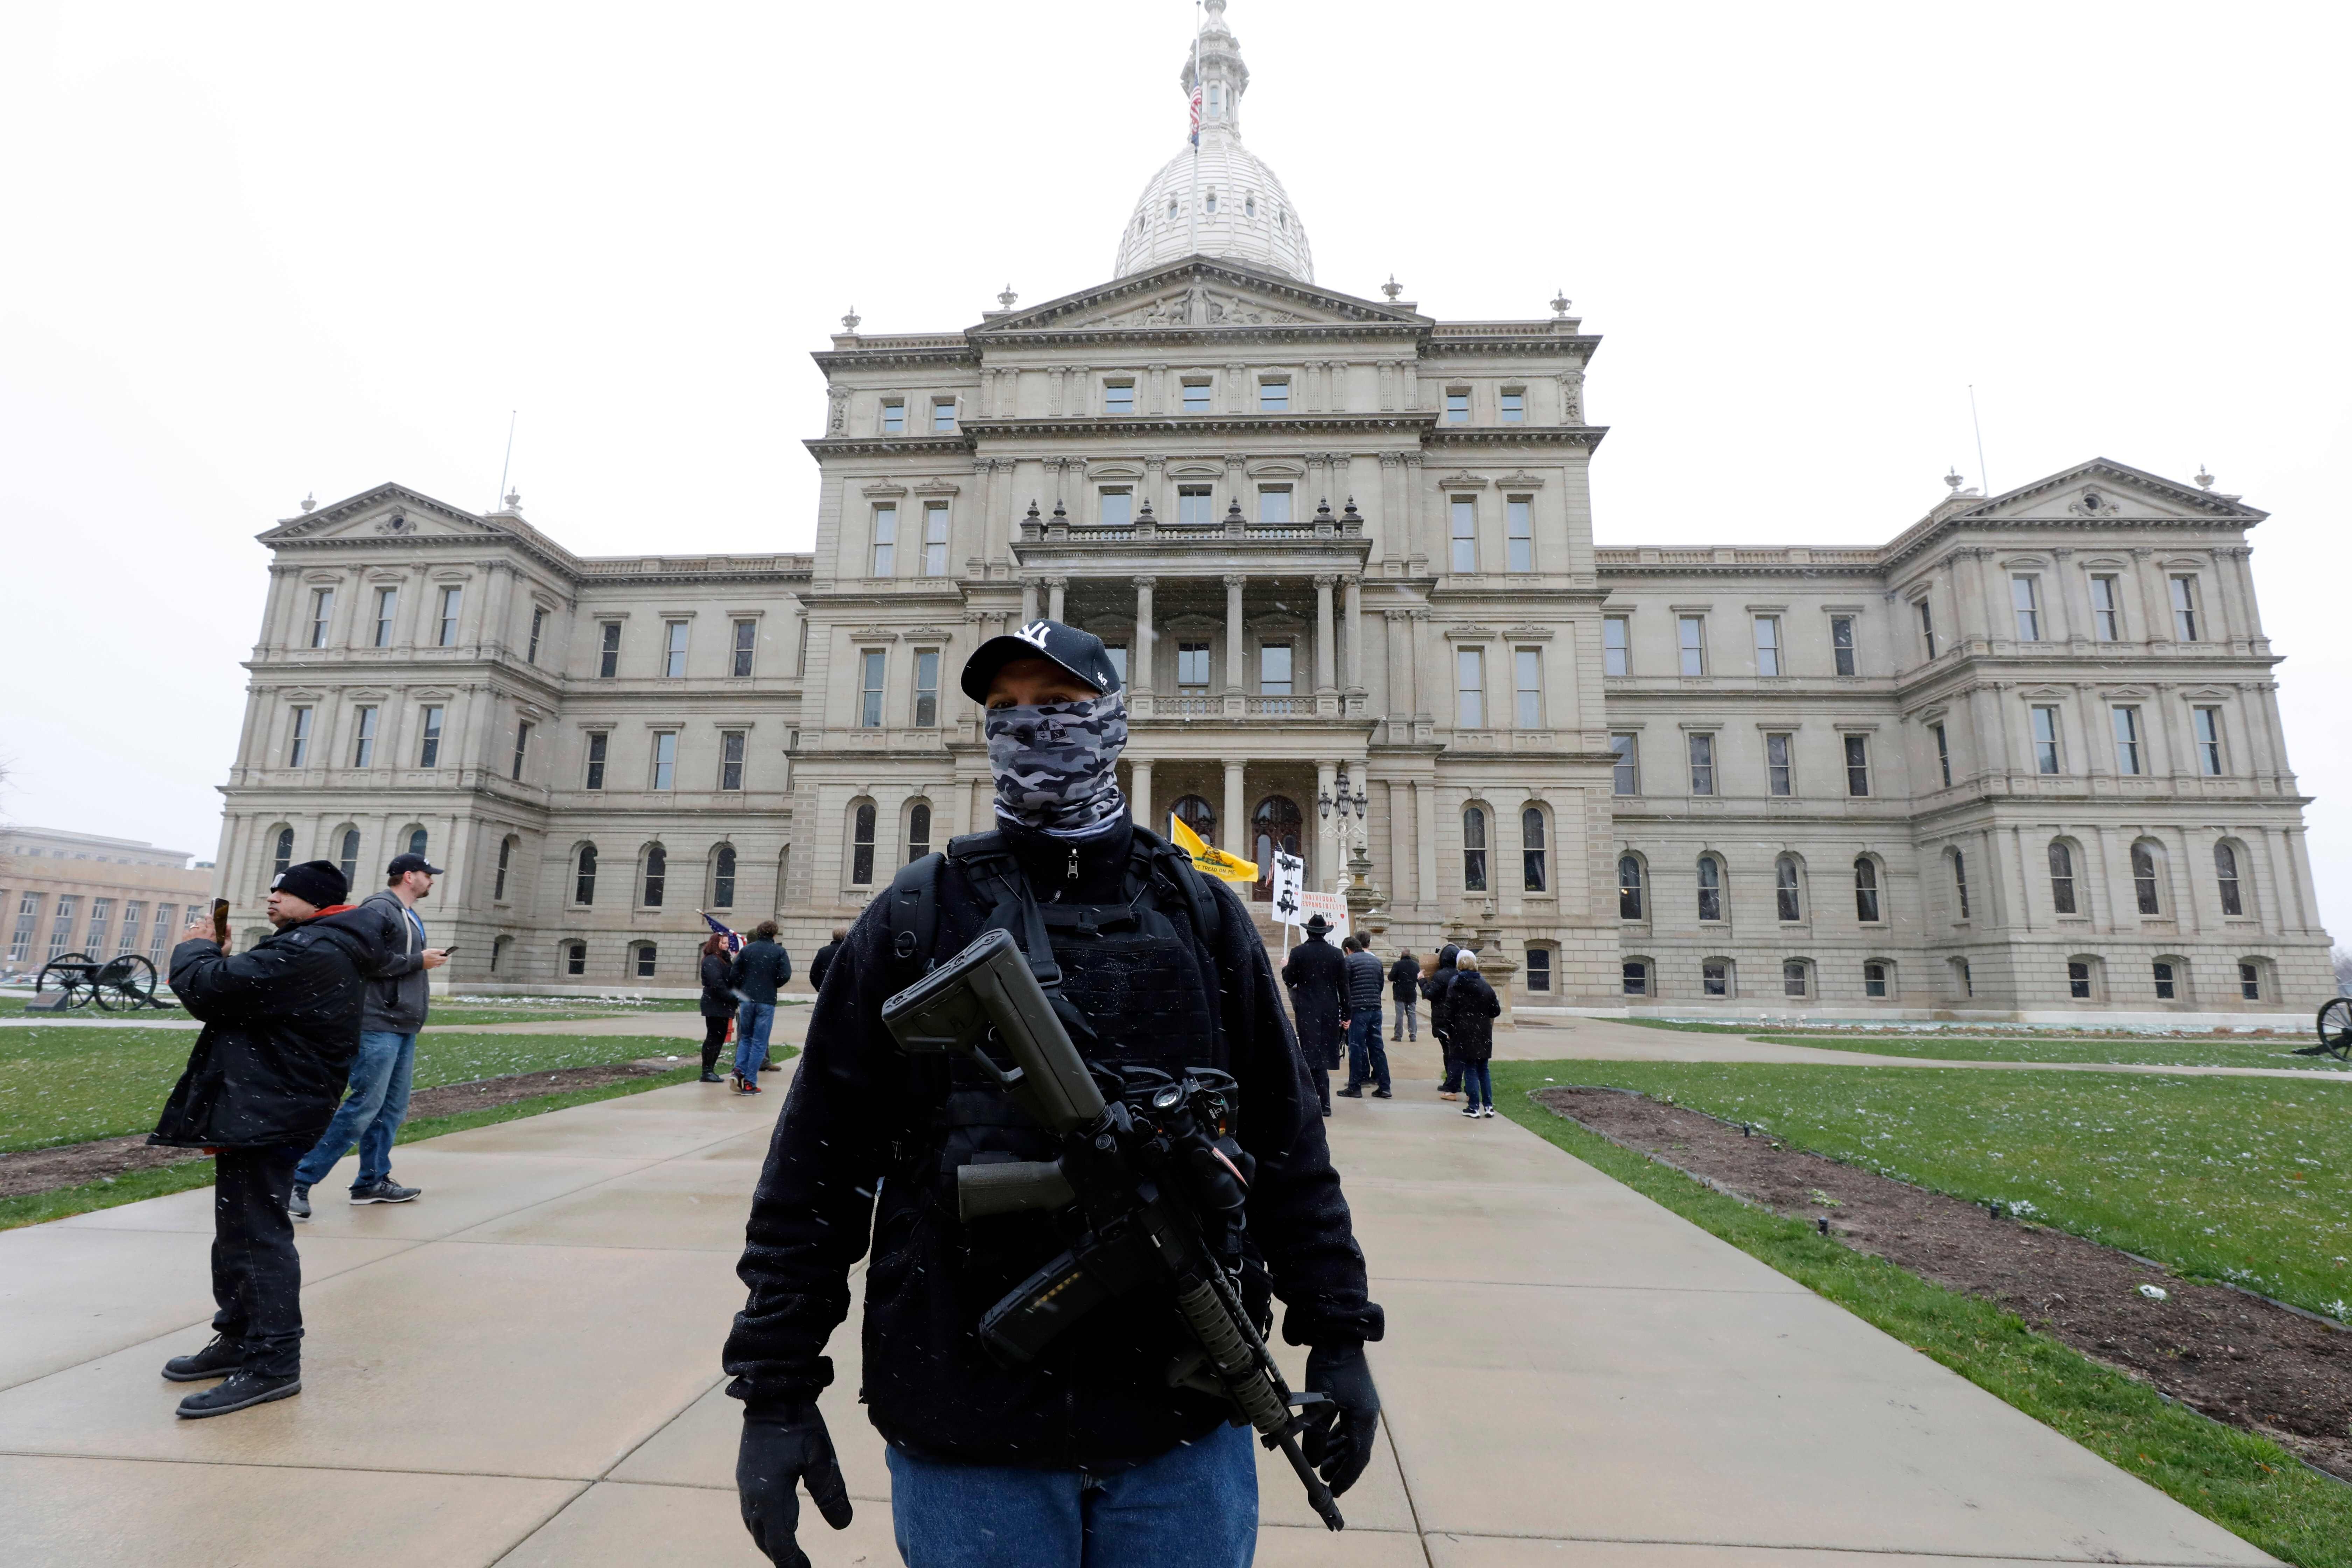 People protest against “excessive quarantine” at the Michigan State Capitol on April 15. Photo: AFP